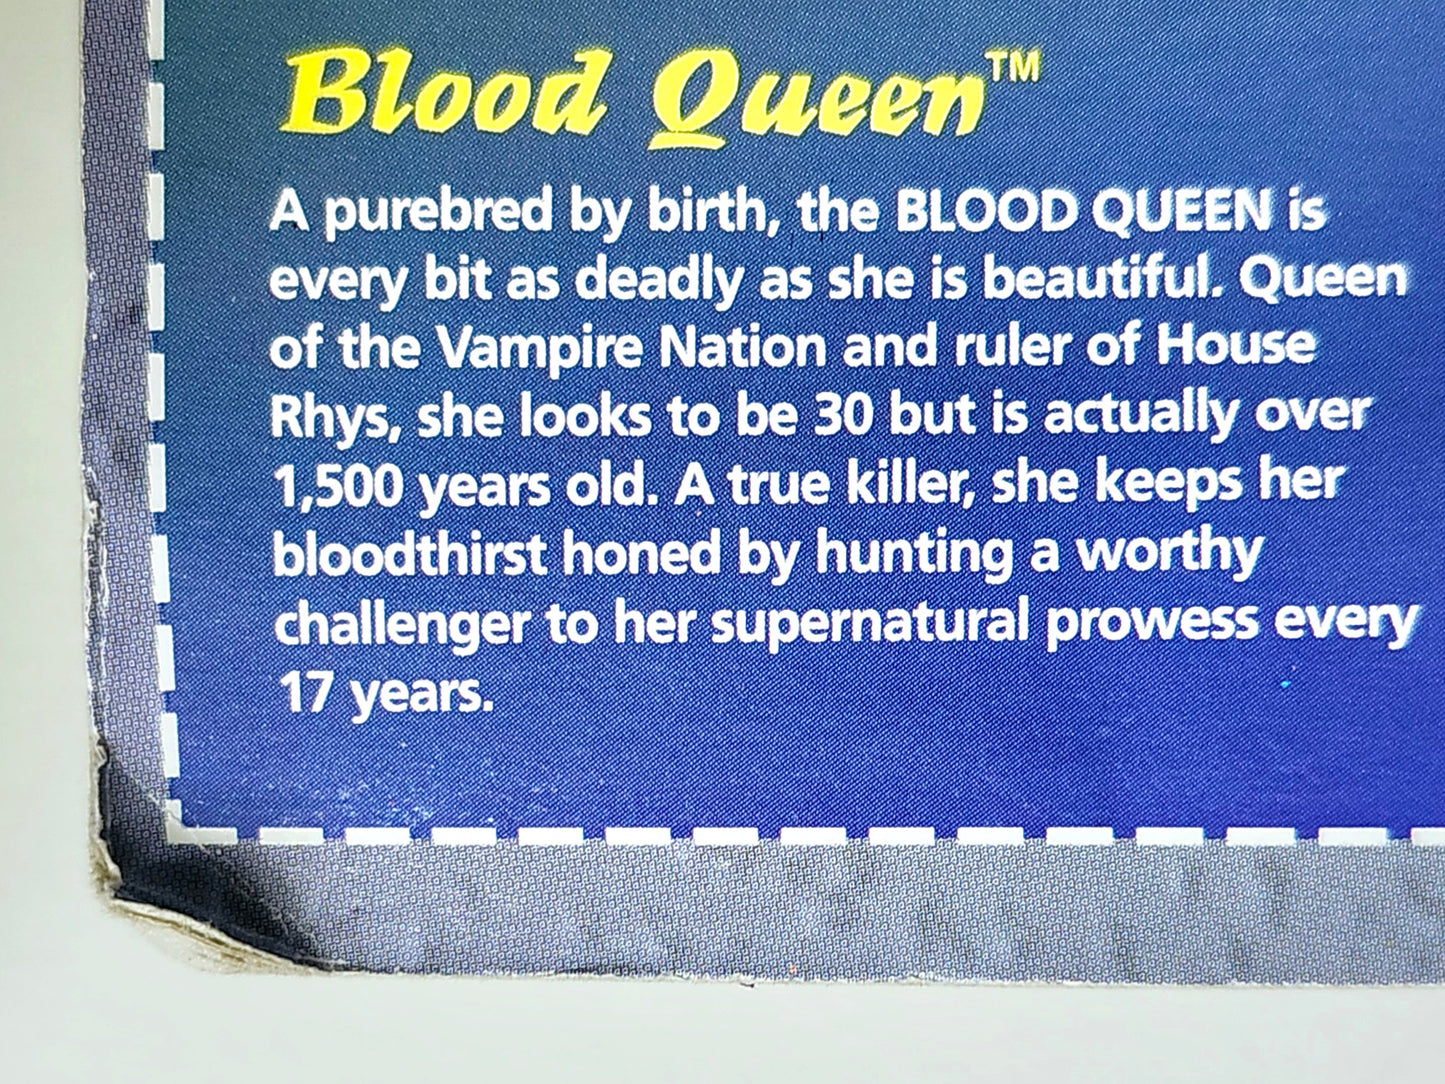 Wetworks Blood Queen (Red Variant) Action Figure